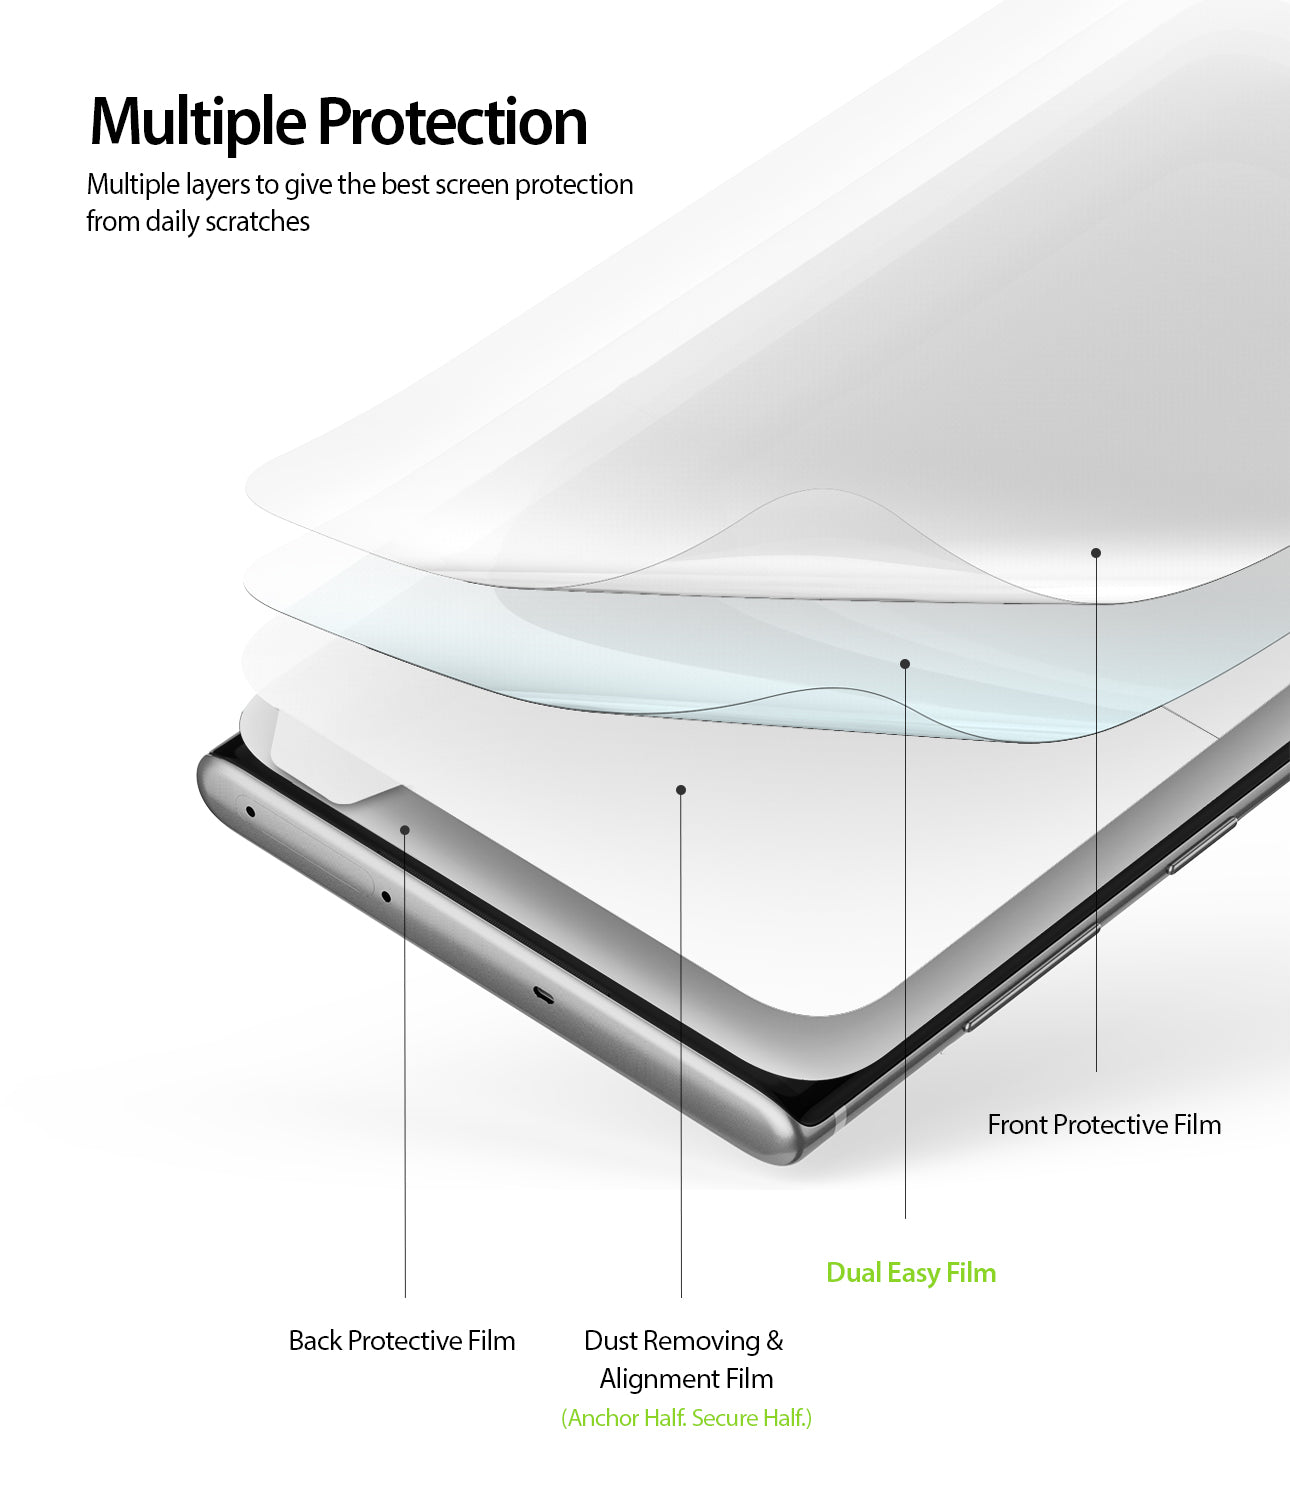 multiple protection with 4 layer application system